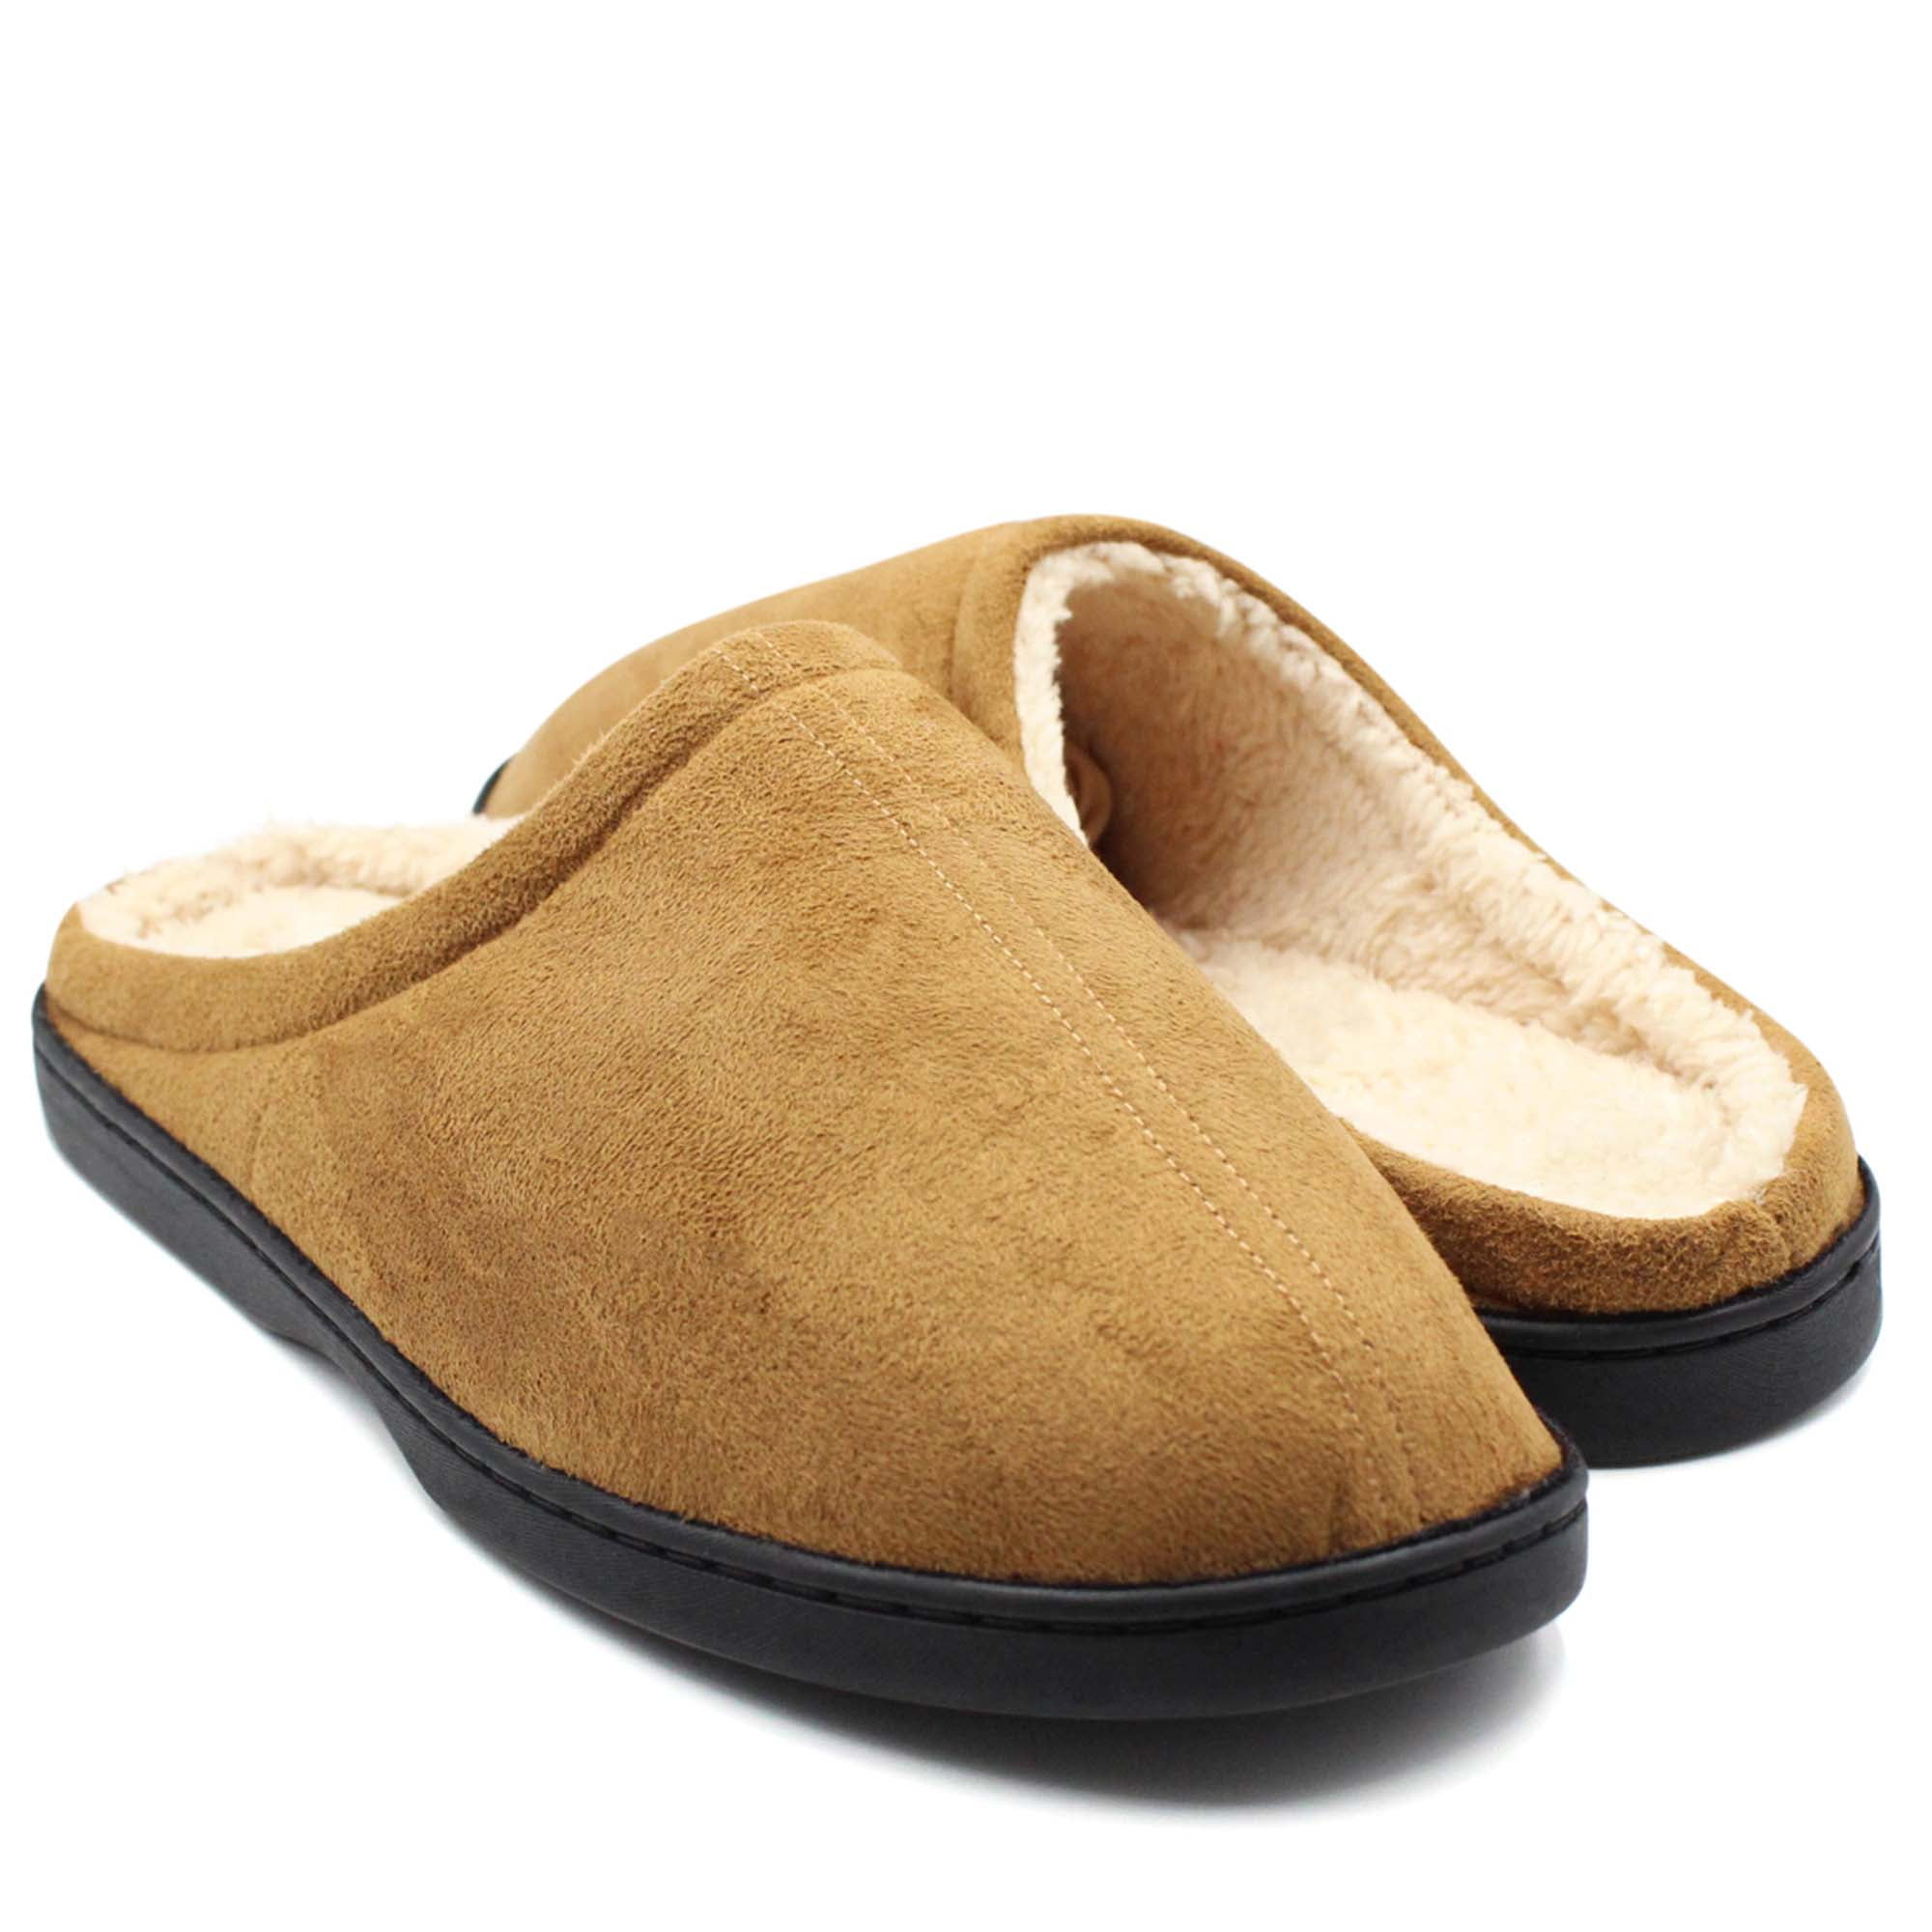 MENS WARM INDOOR HARD SOLE SLIP ON COMFY FLEECE LINED SLIPPERS SHOES SIZE 7-12